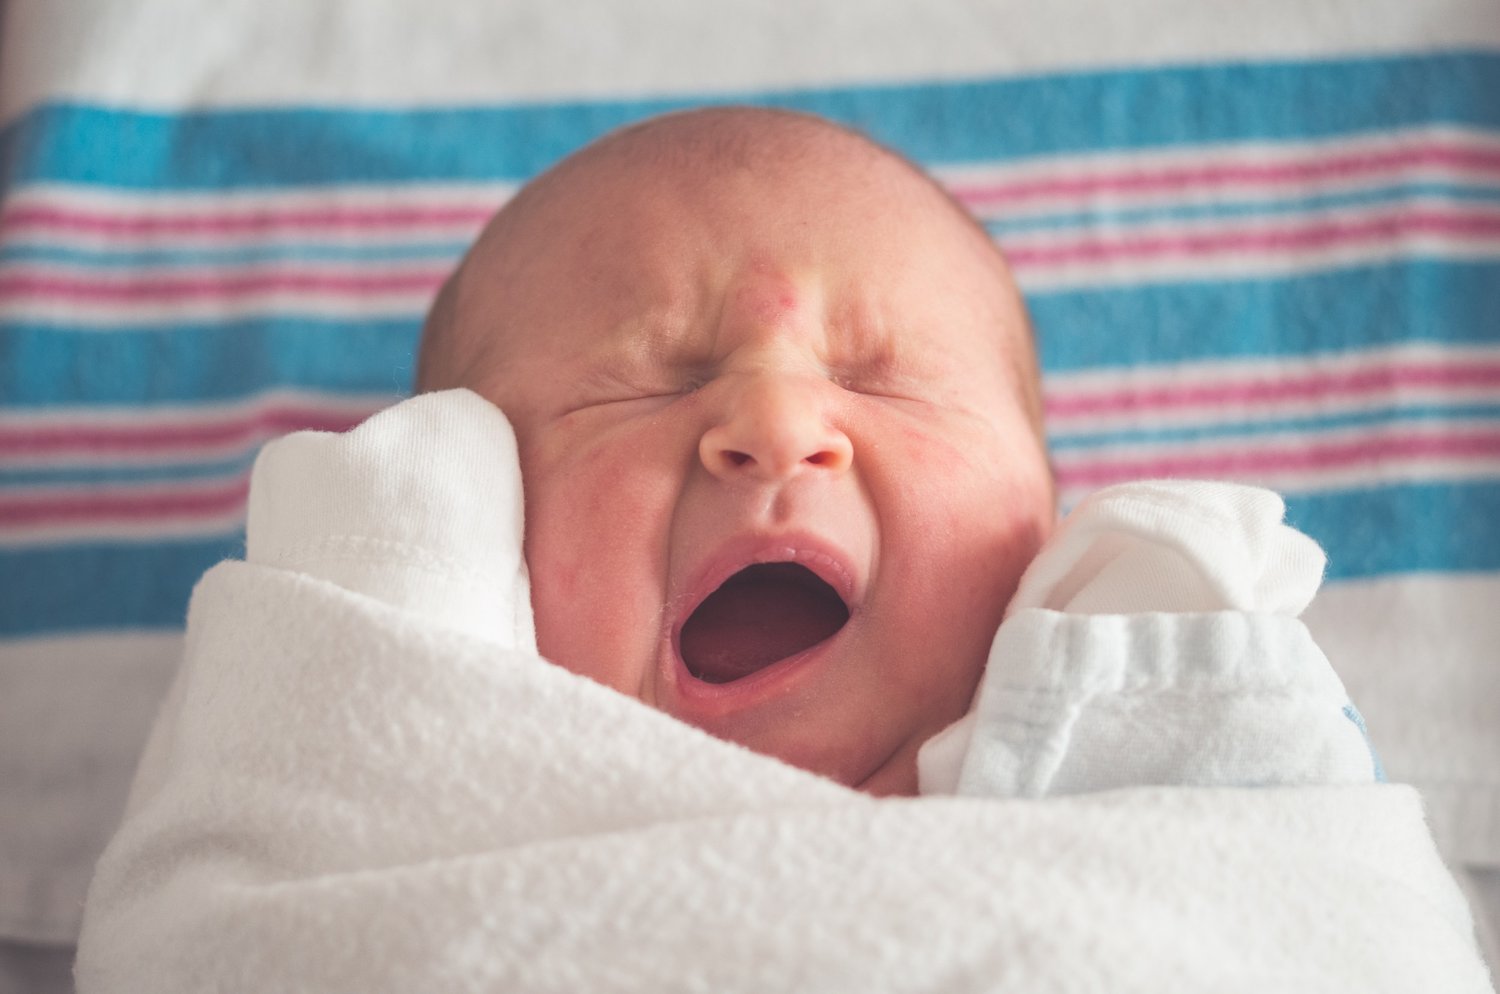 Infant Reflux - What to do!